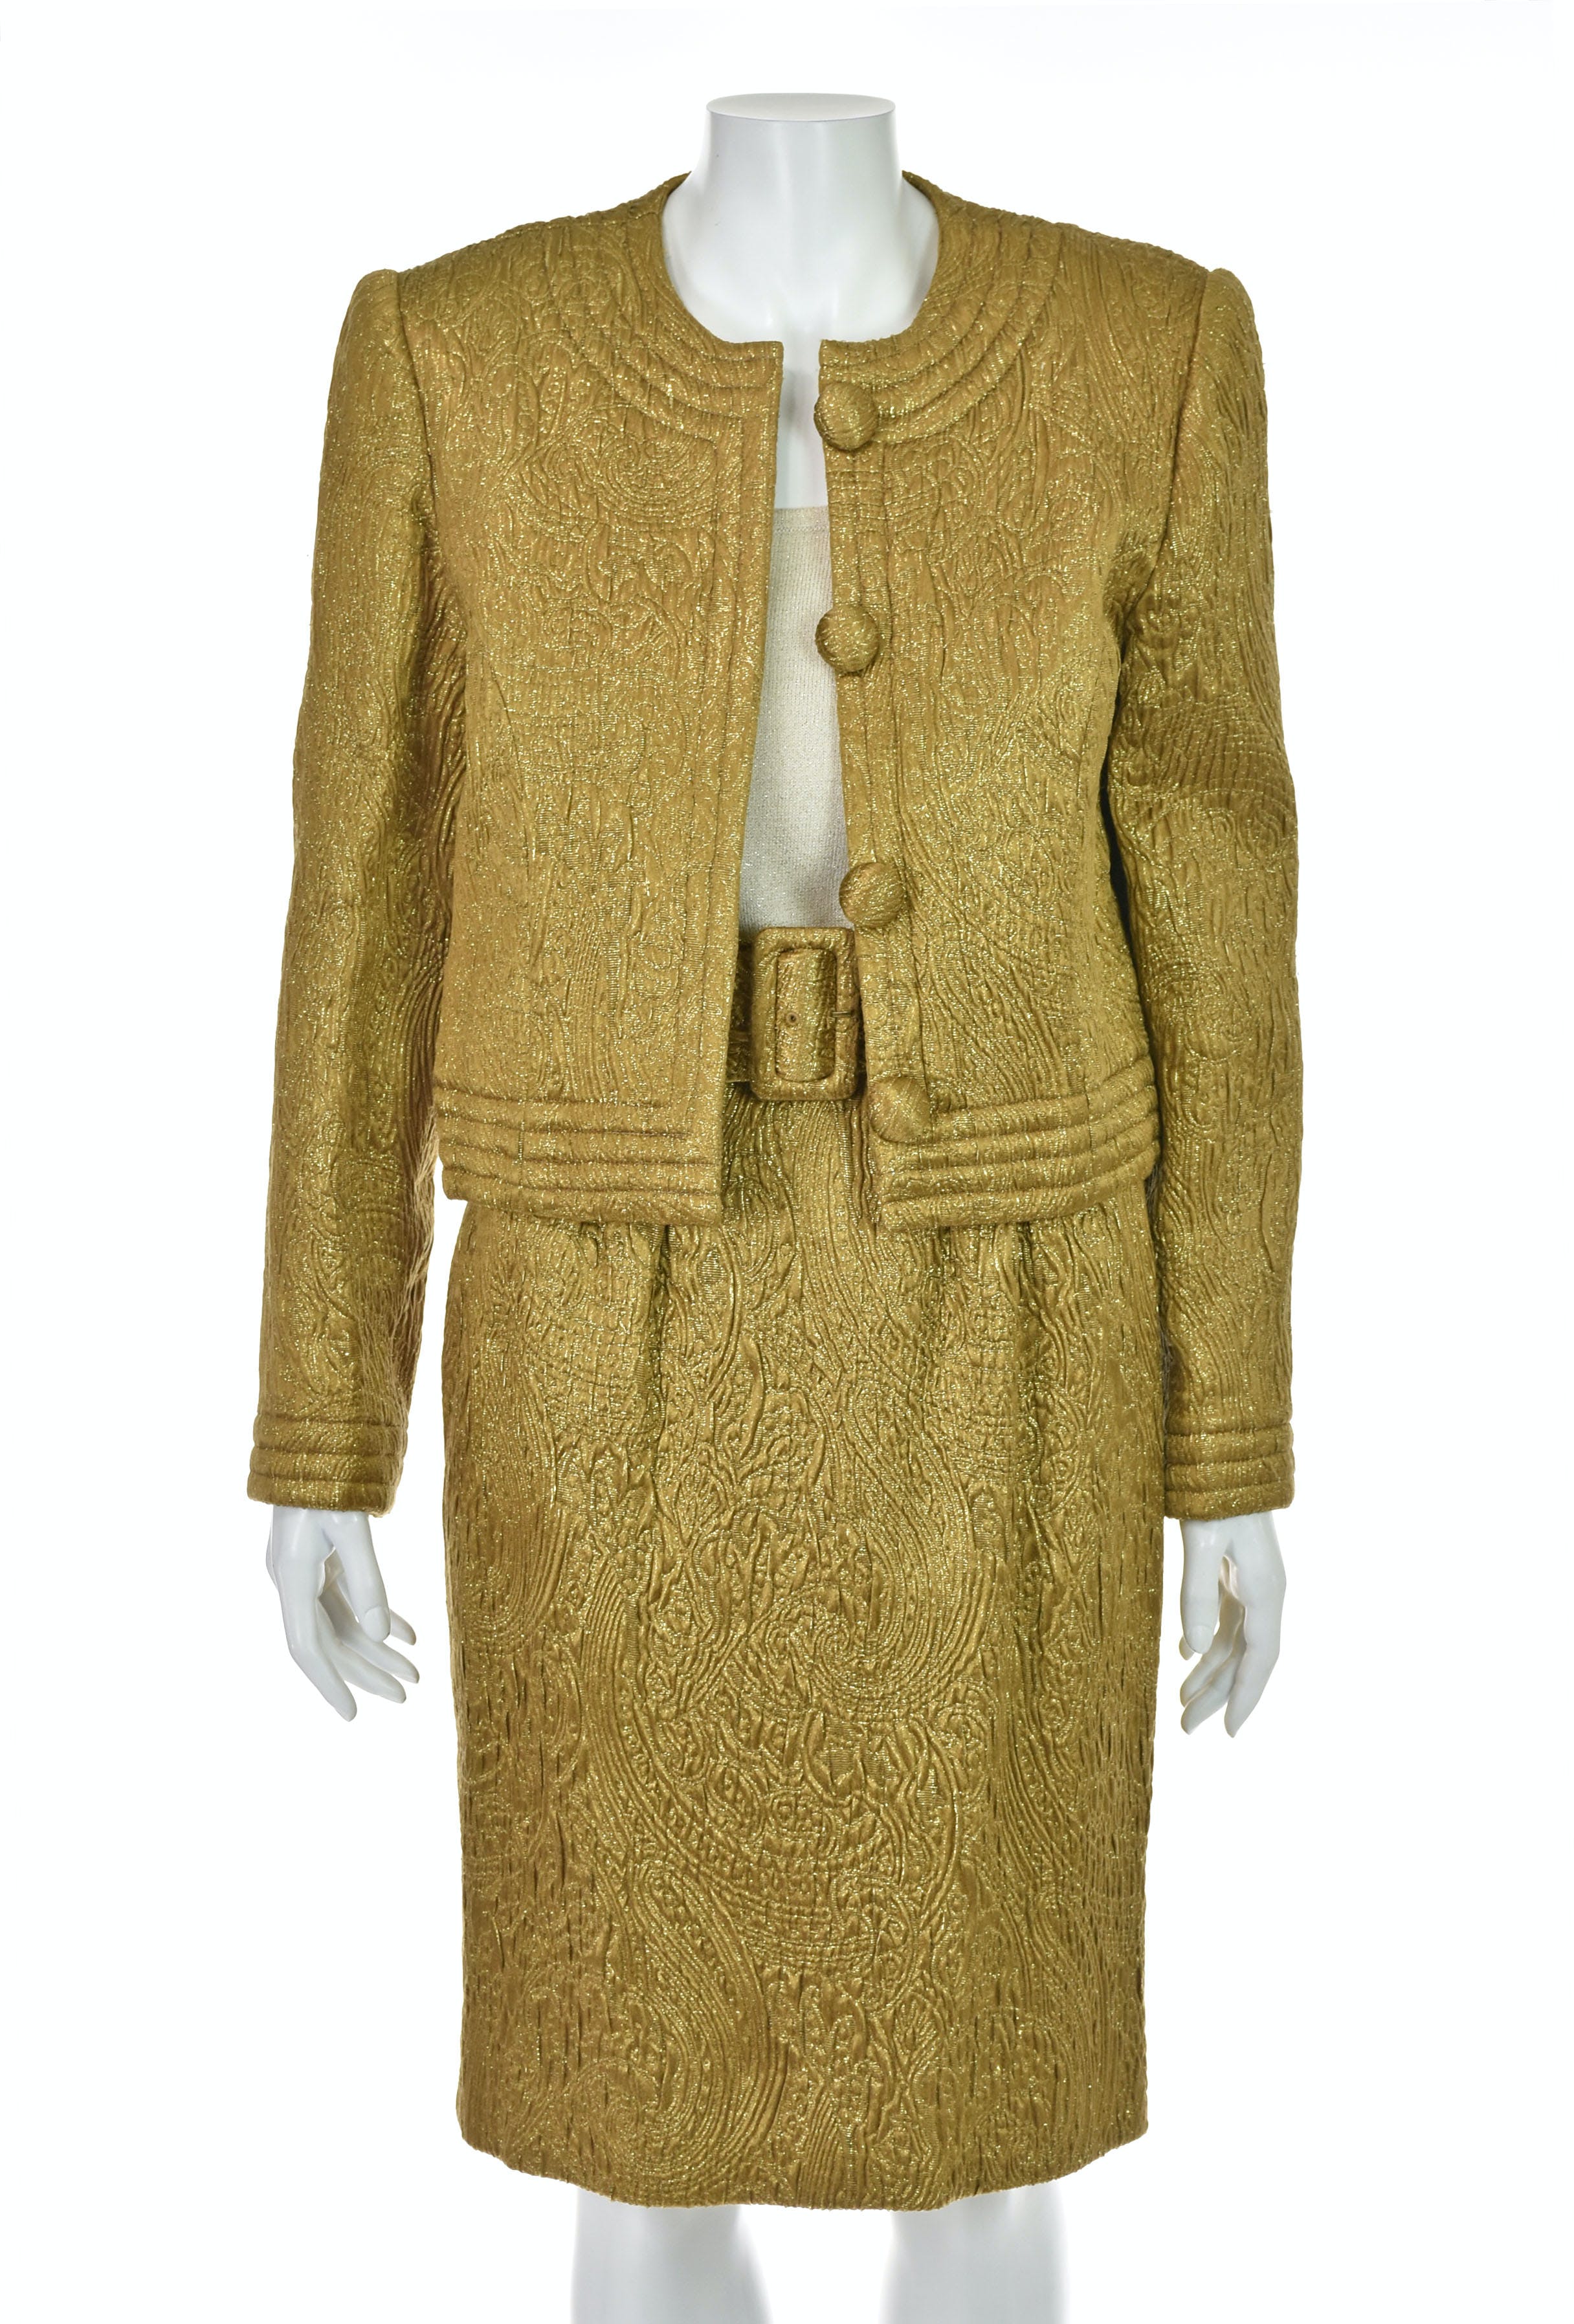 Vintage 80's Glamorous Gold Jacquard Evening Suit by Stanley Platos ...